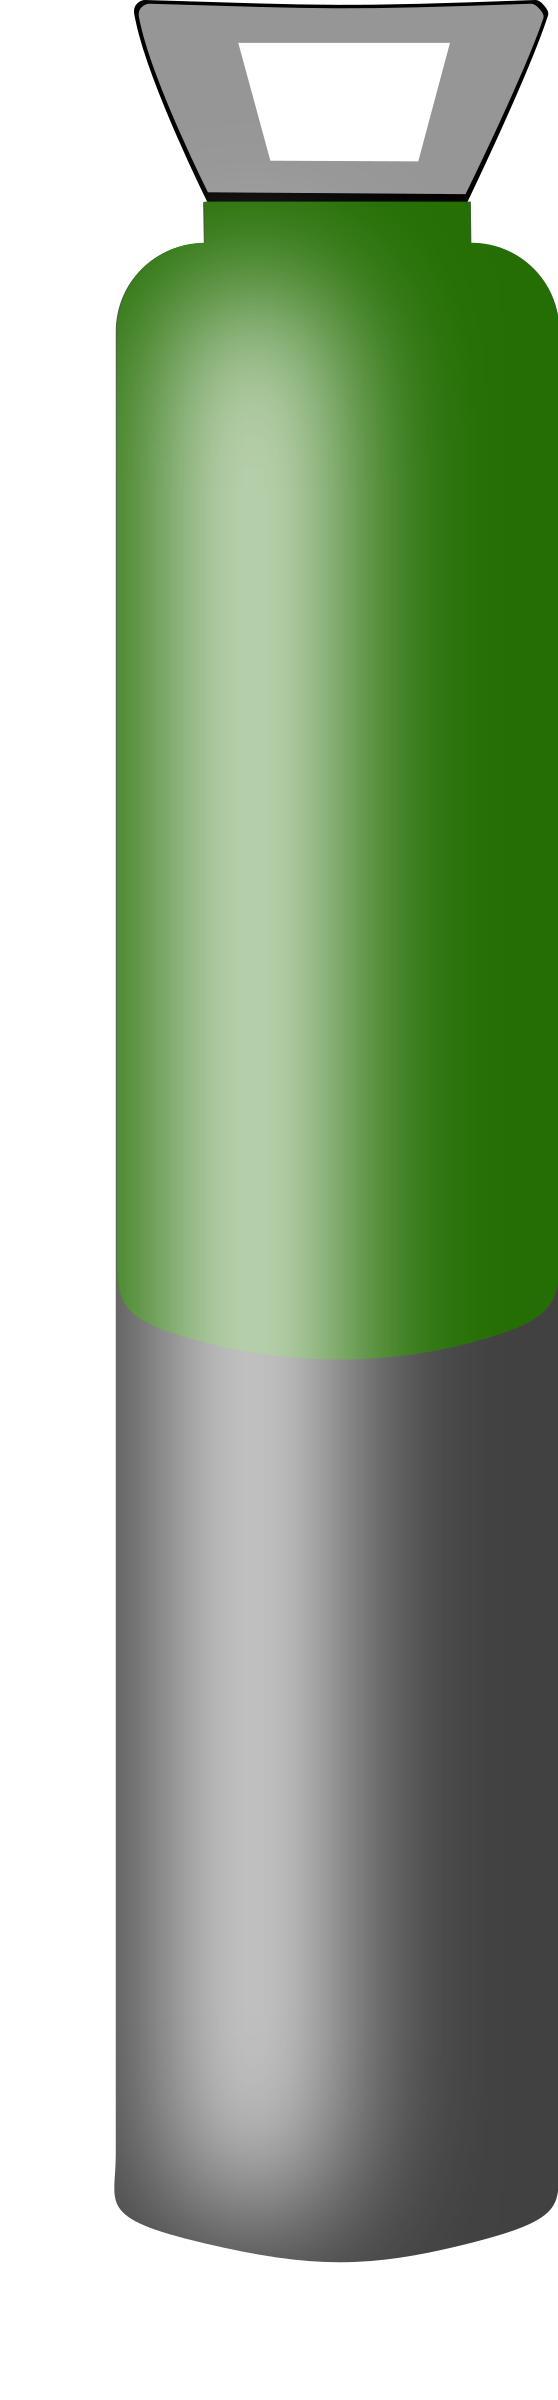 Gas cylinder grey and dark green, high pressure for Argon png transparent